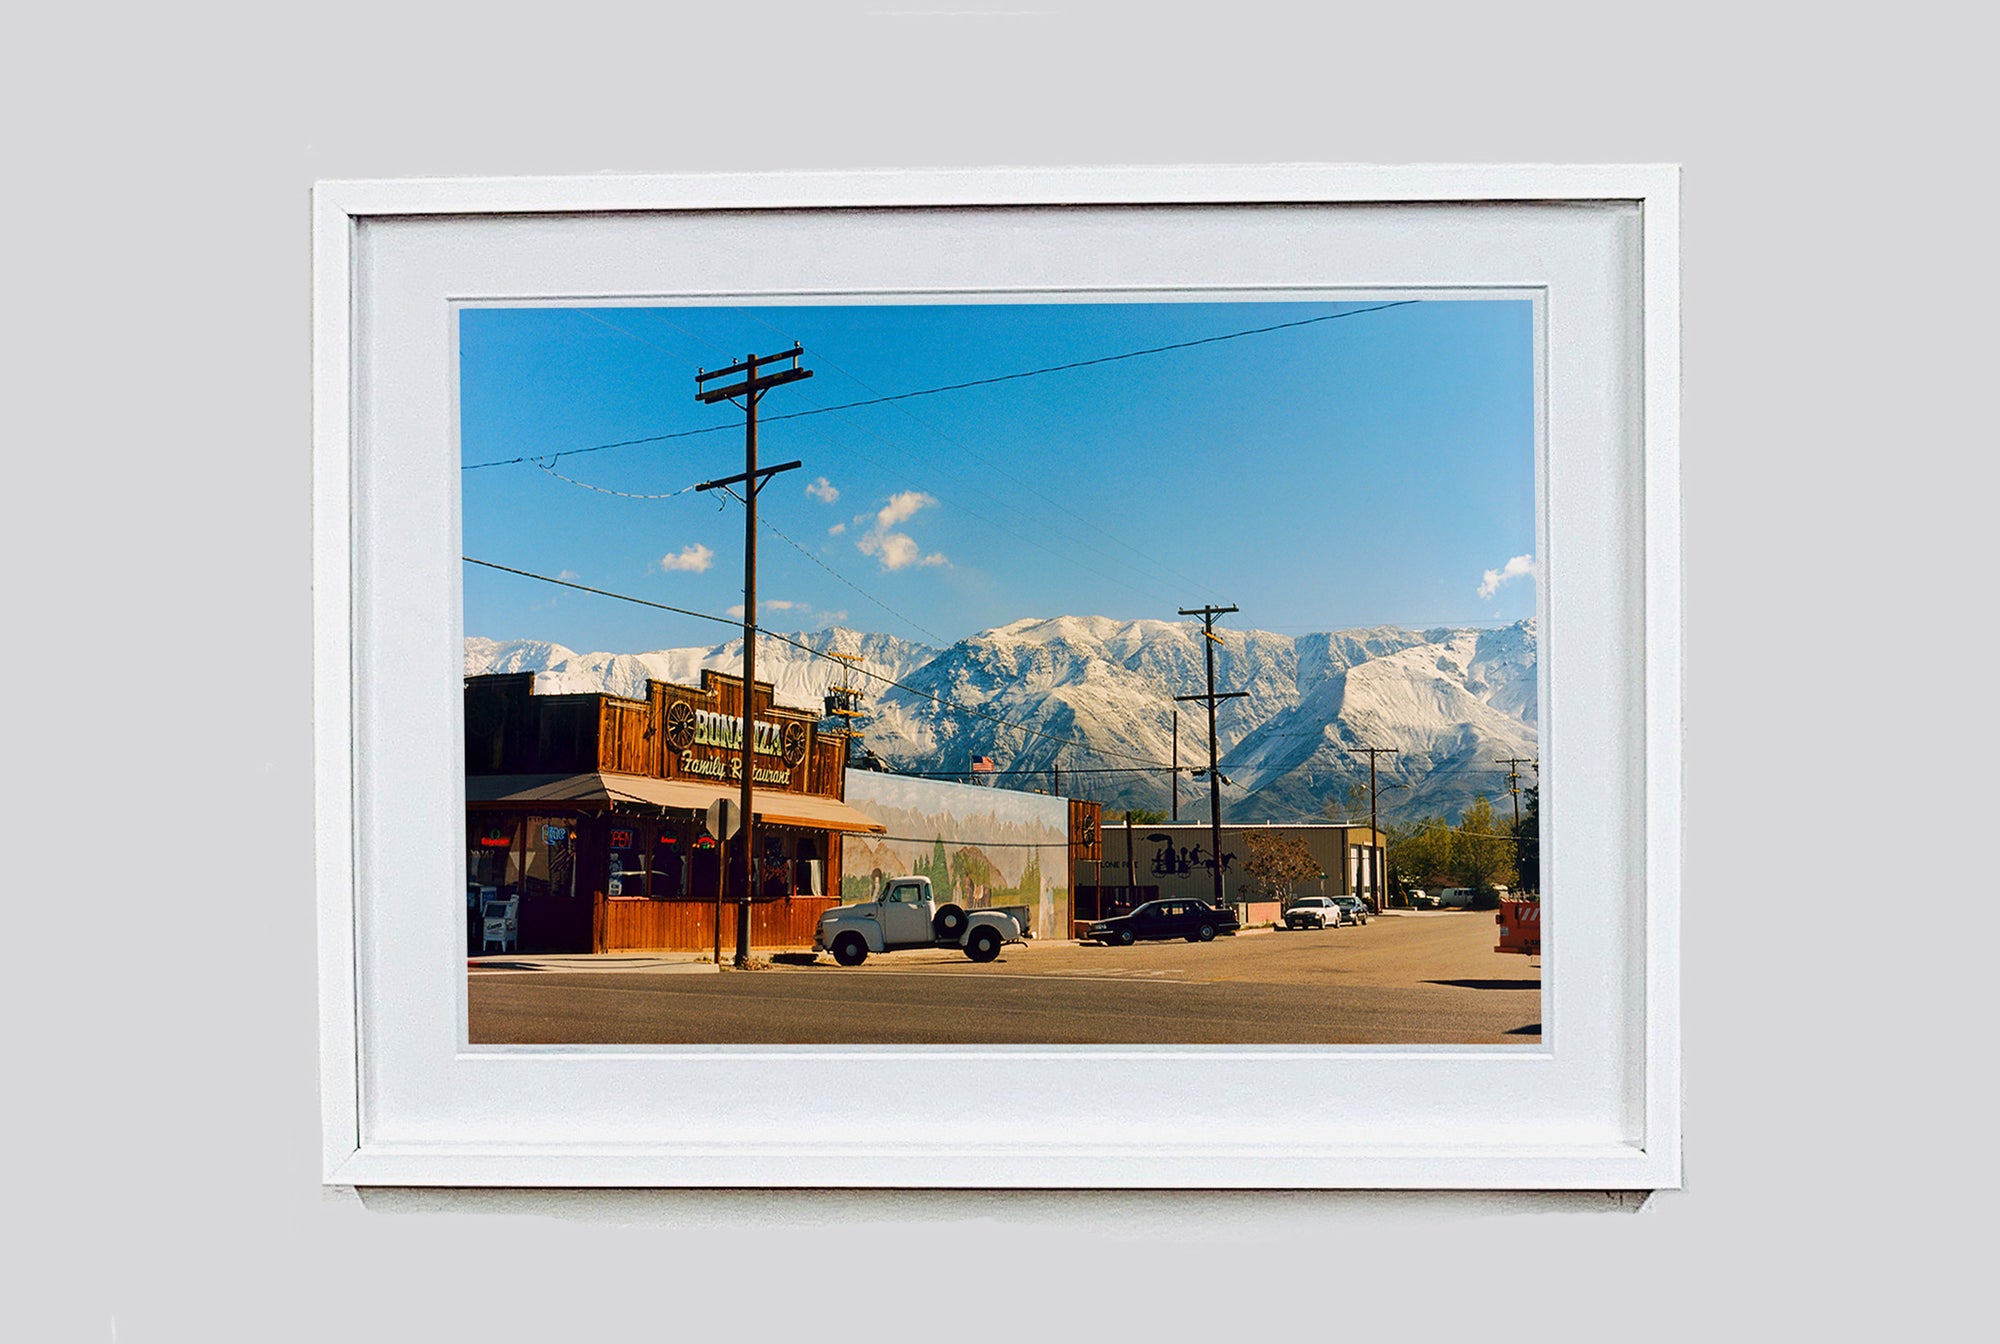 There is a cinematic style to this artwork, 'Lone Pine', taken in a former movie town in California where many Western films were made. Taken outside Richard's iconic interior photograph 'Bonanza Café', set in the Owens Valley against a mountainous  backdrop.